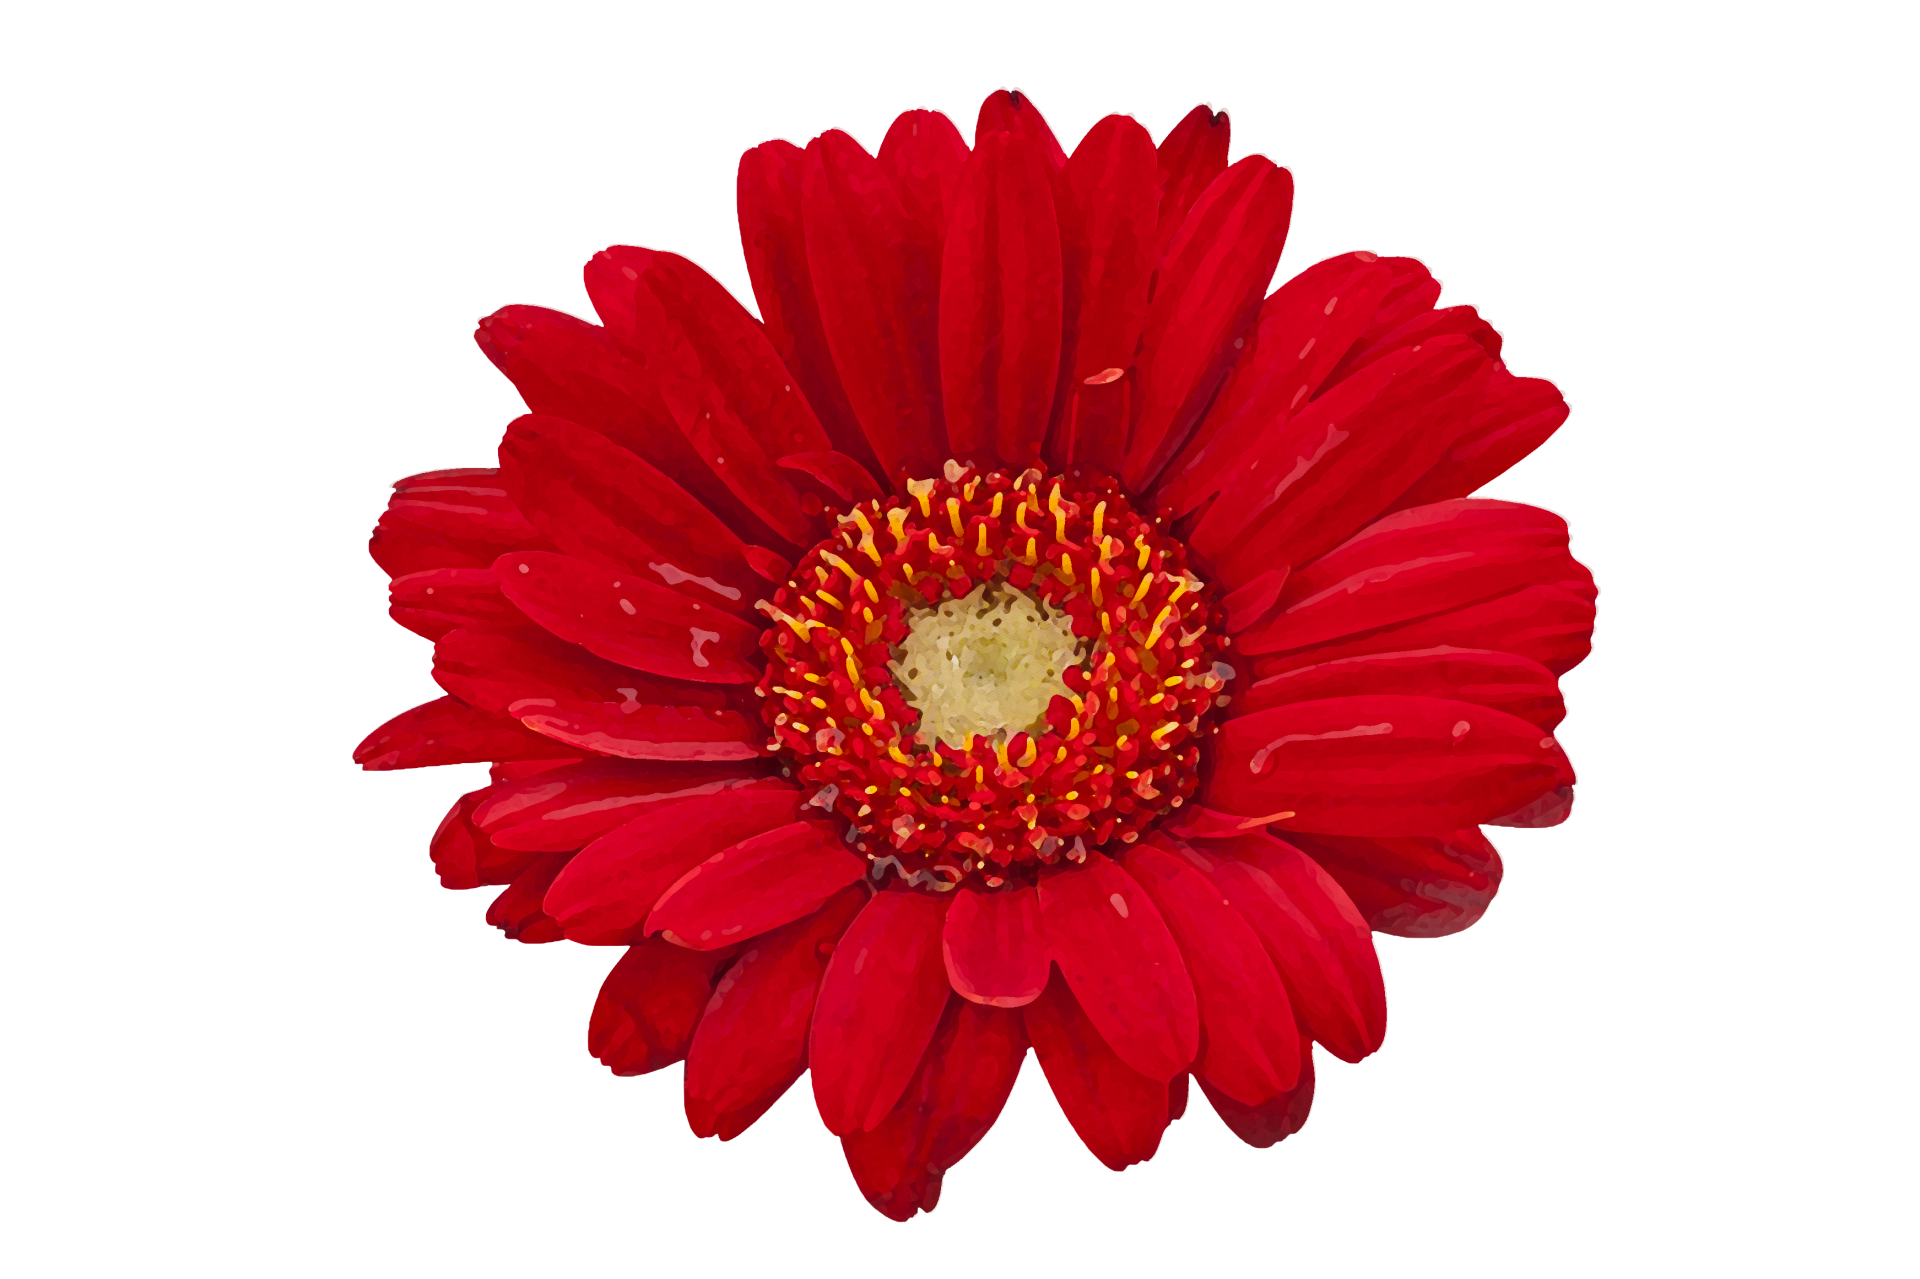 Red daisy flower watercolor painting on transparent background